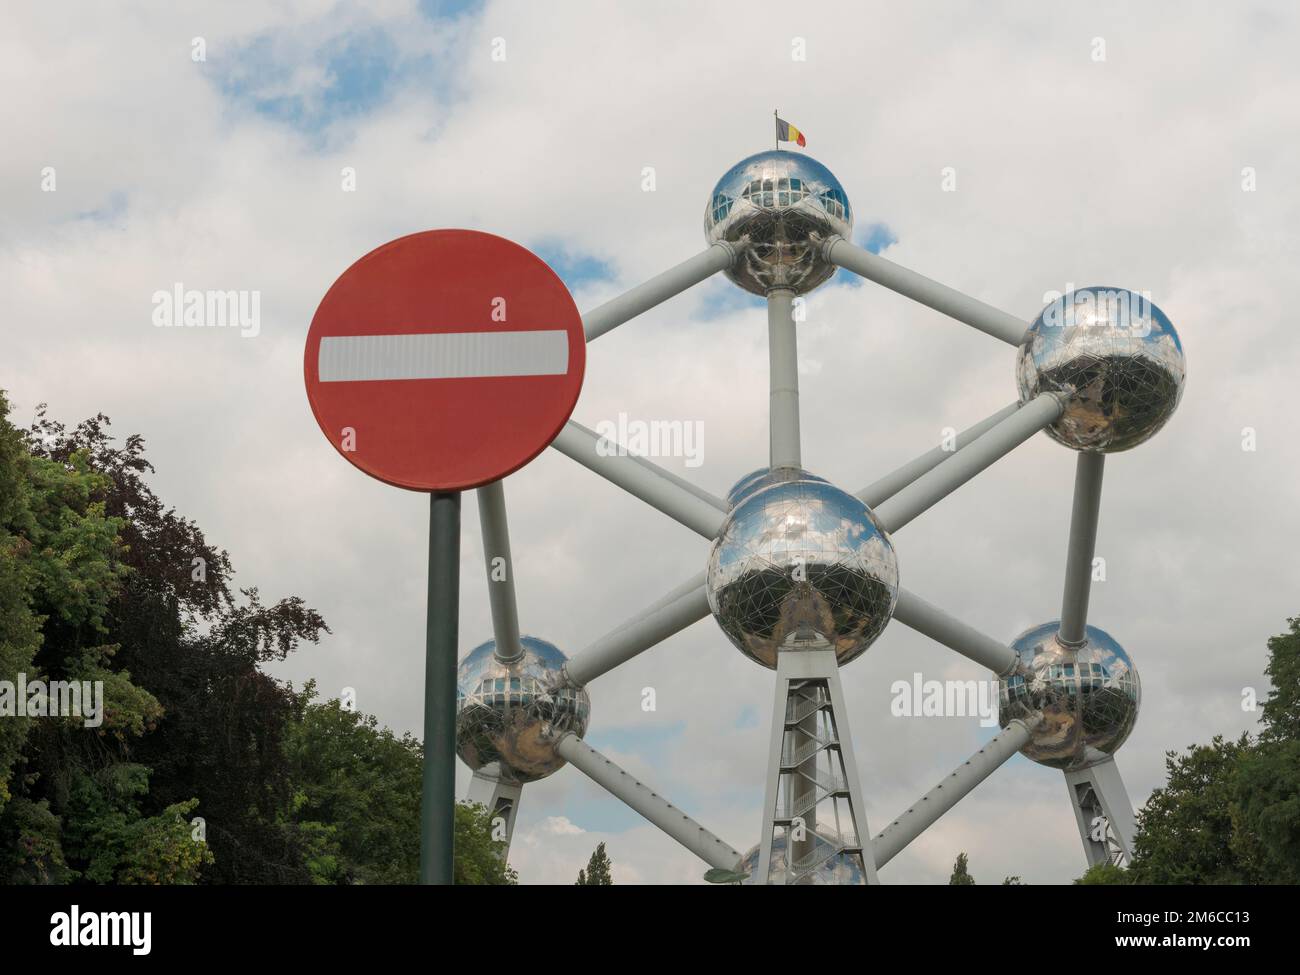 Brussels, Brussels-Capital Region, Belgium 20-08-2021.  The Atomium in combination with a road sign - No entry. Stock Photo